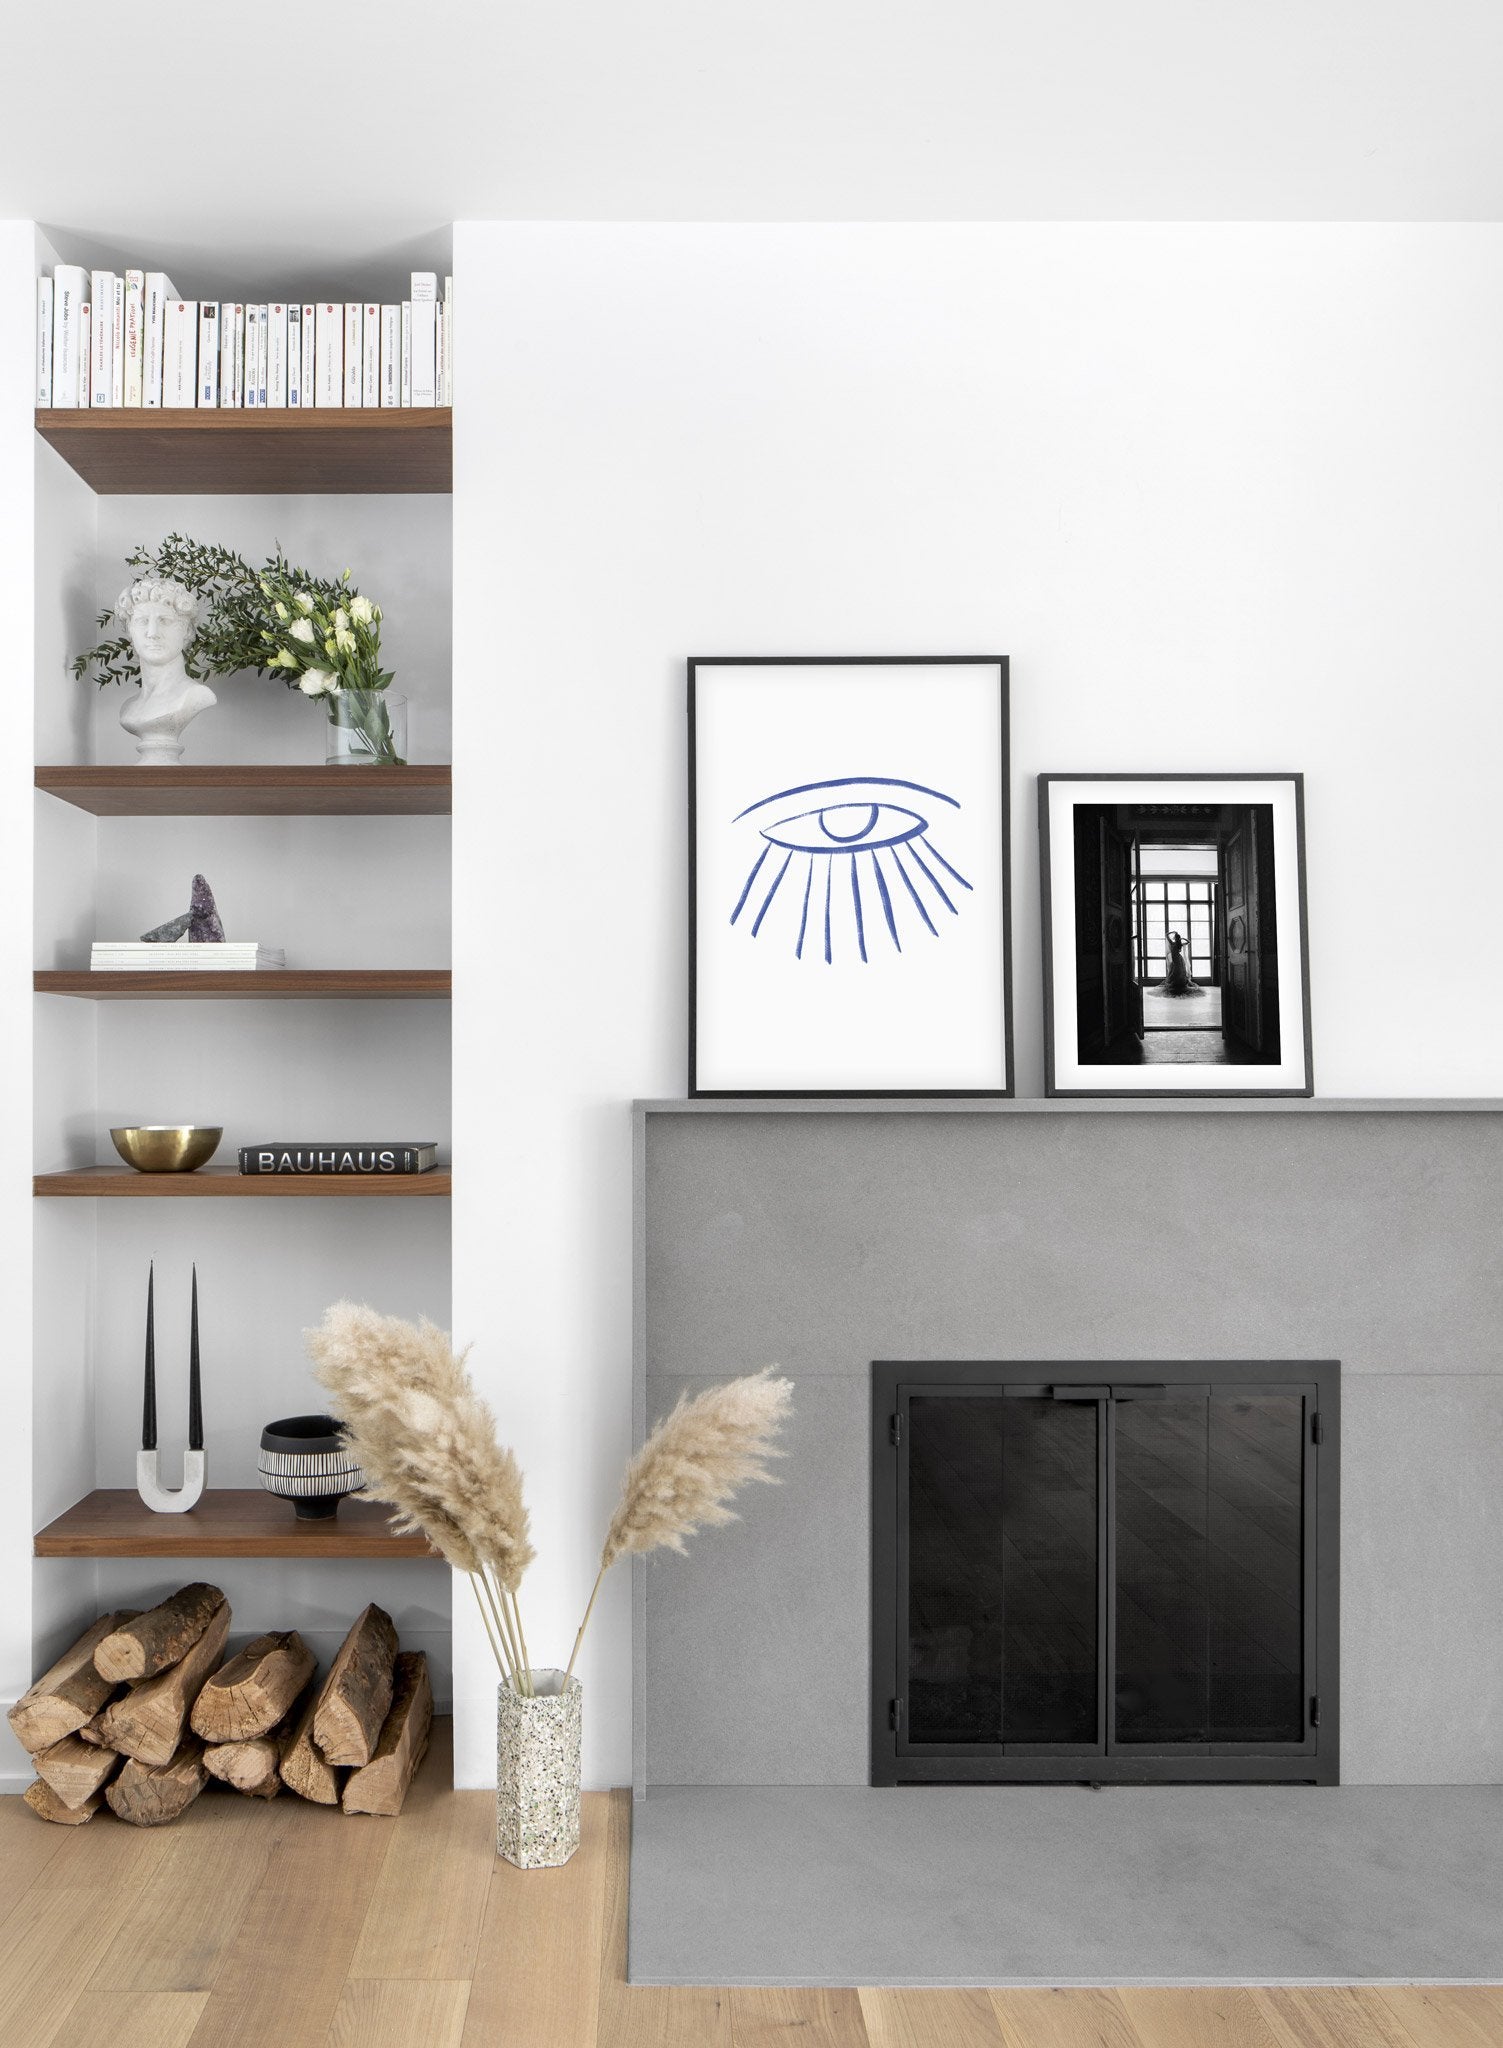 Modern minimalist poster by Opposite Wall with abstract design of The Upside Down by Toffie Affichiste - Gallery Wall Duo - Living Room Fireplace